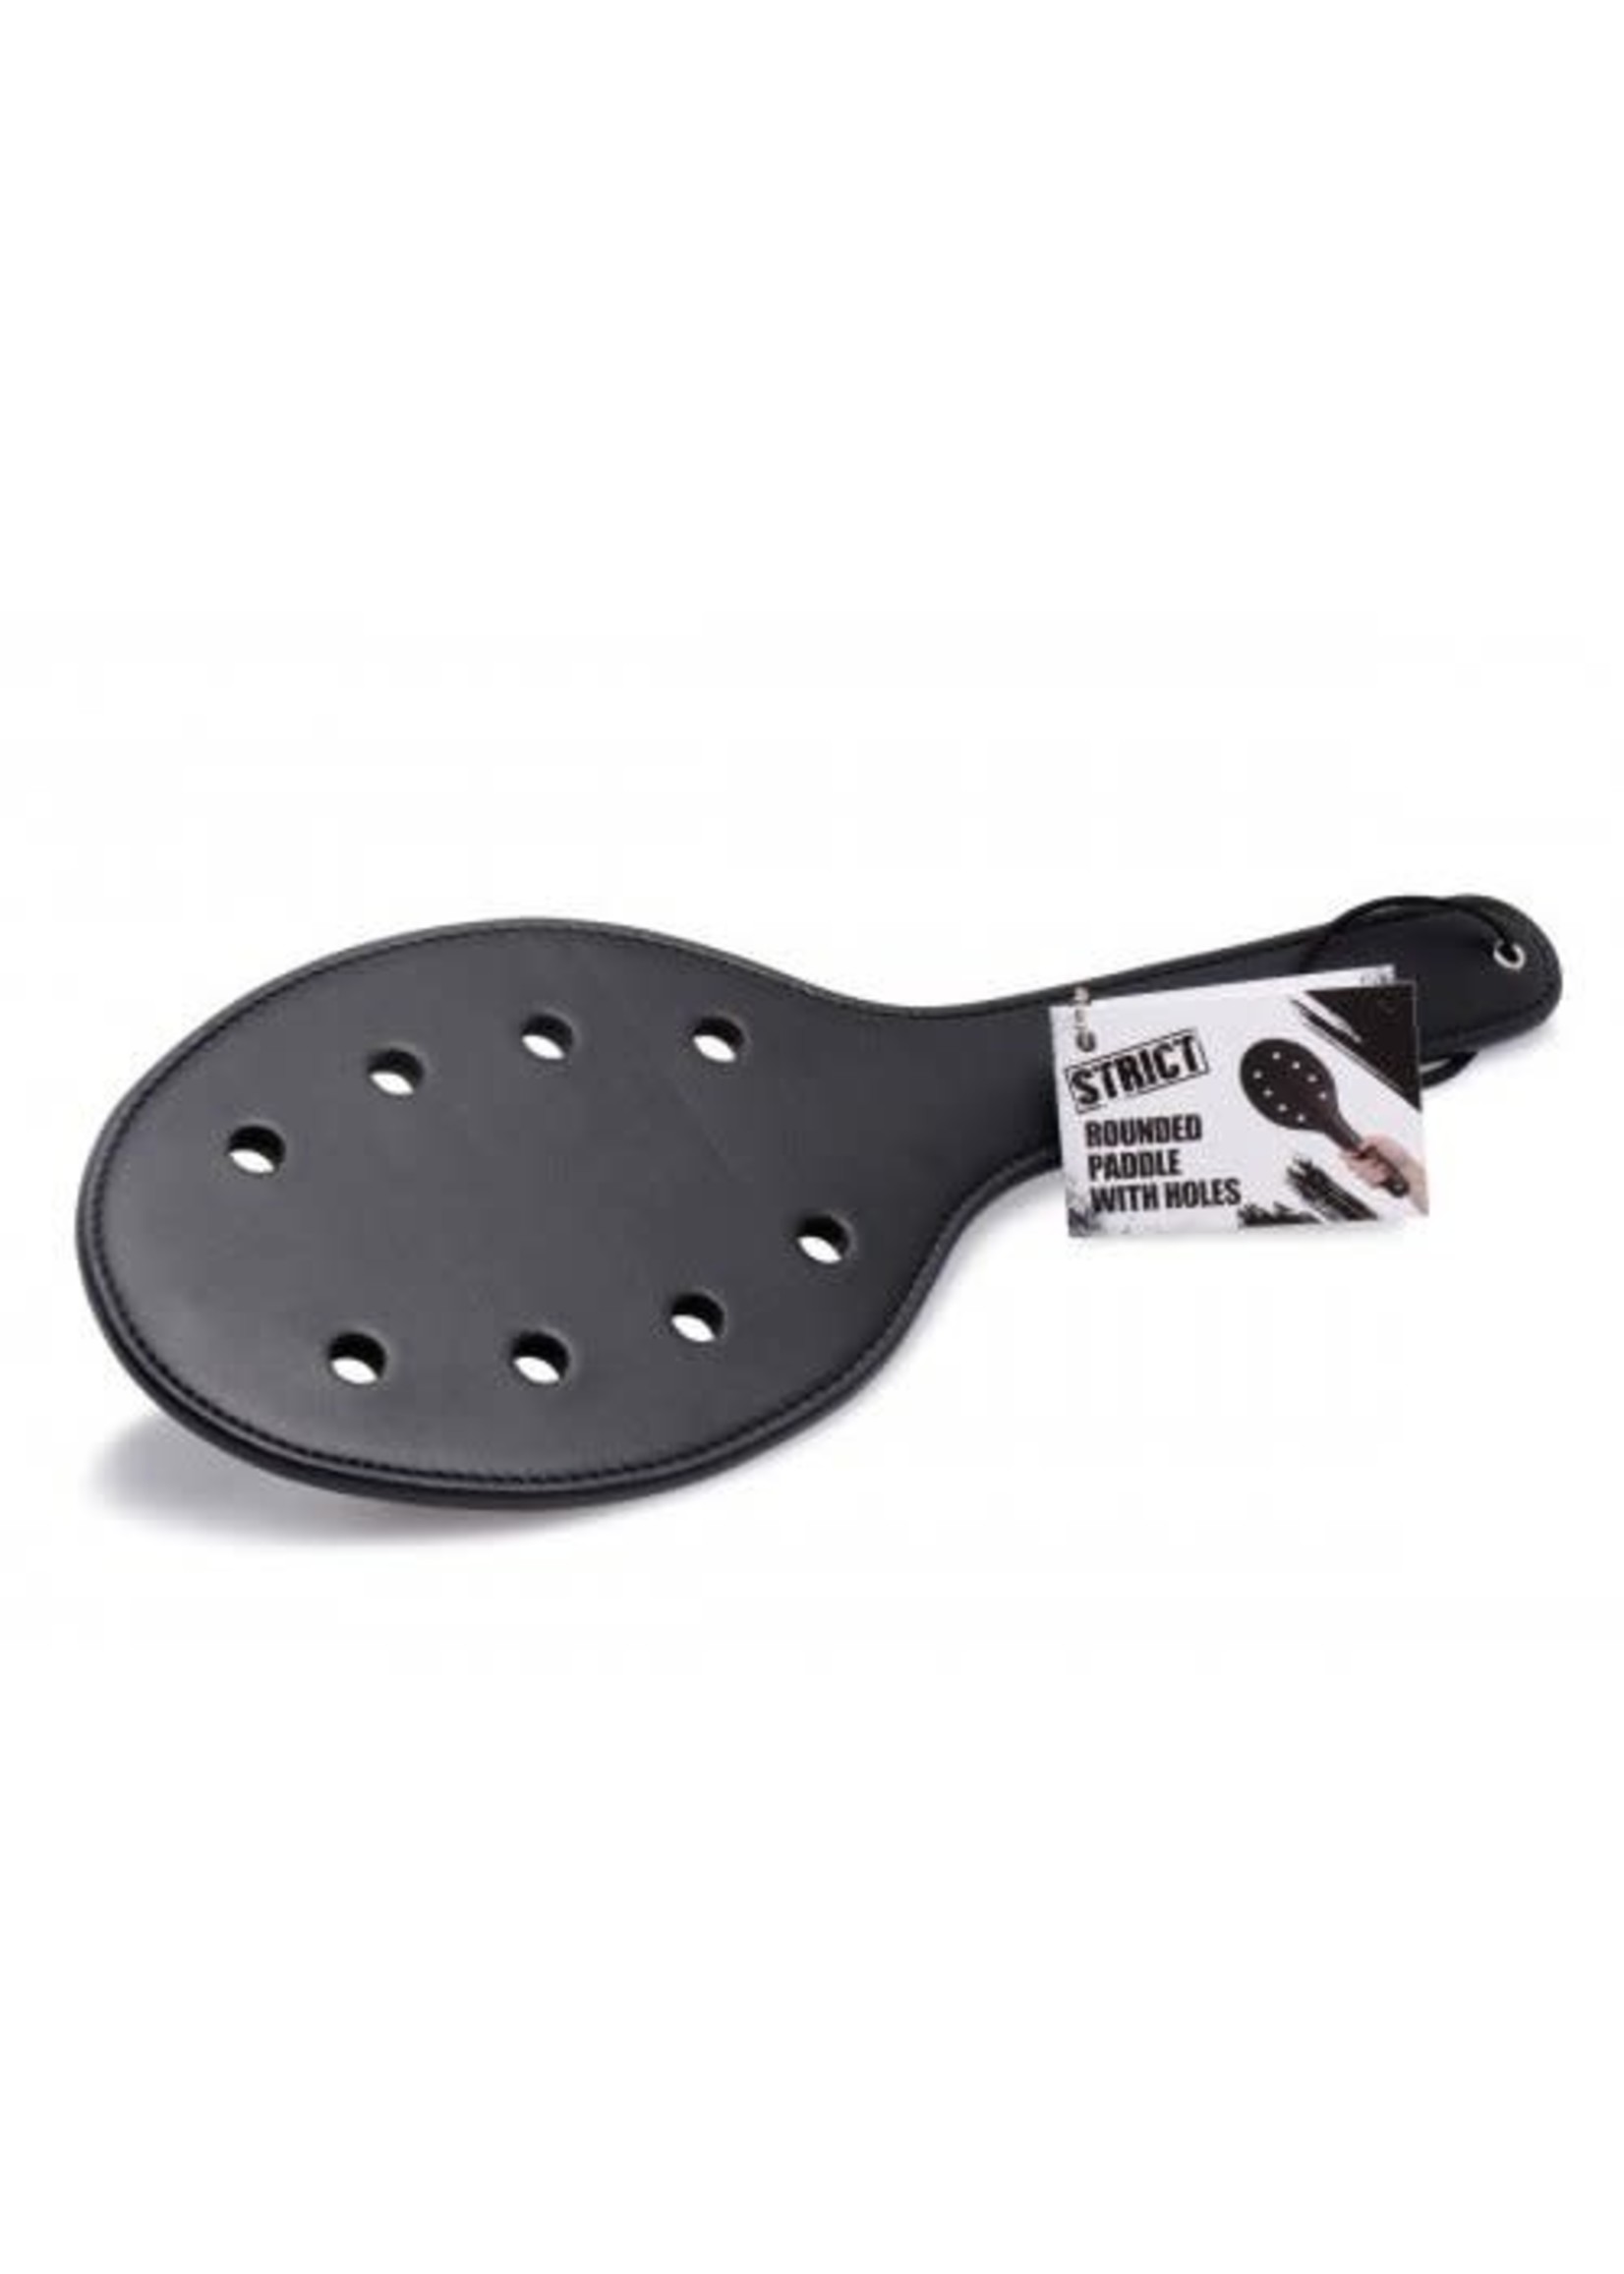 Strict Deluxe Rounded Paddle Black